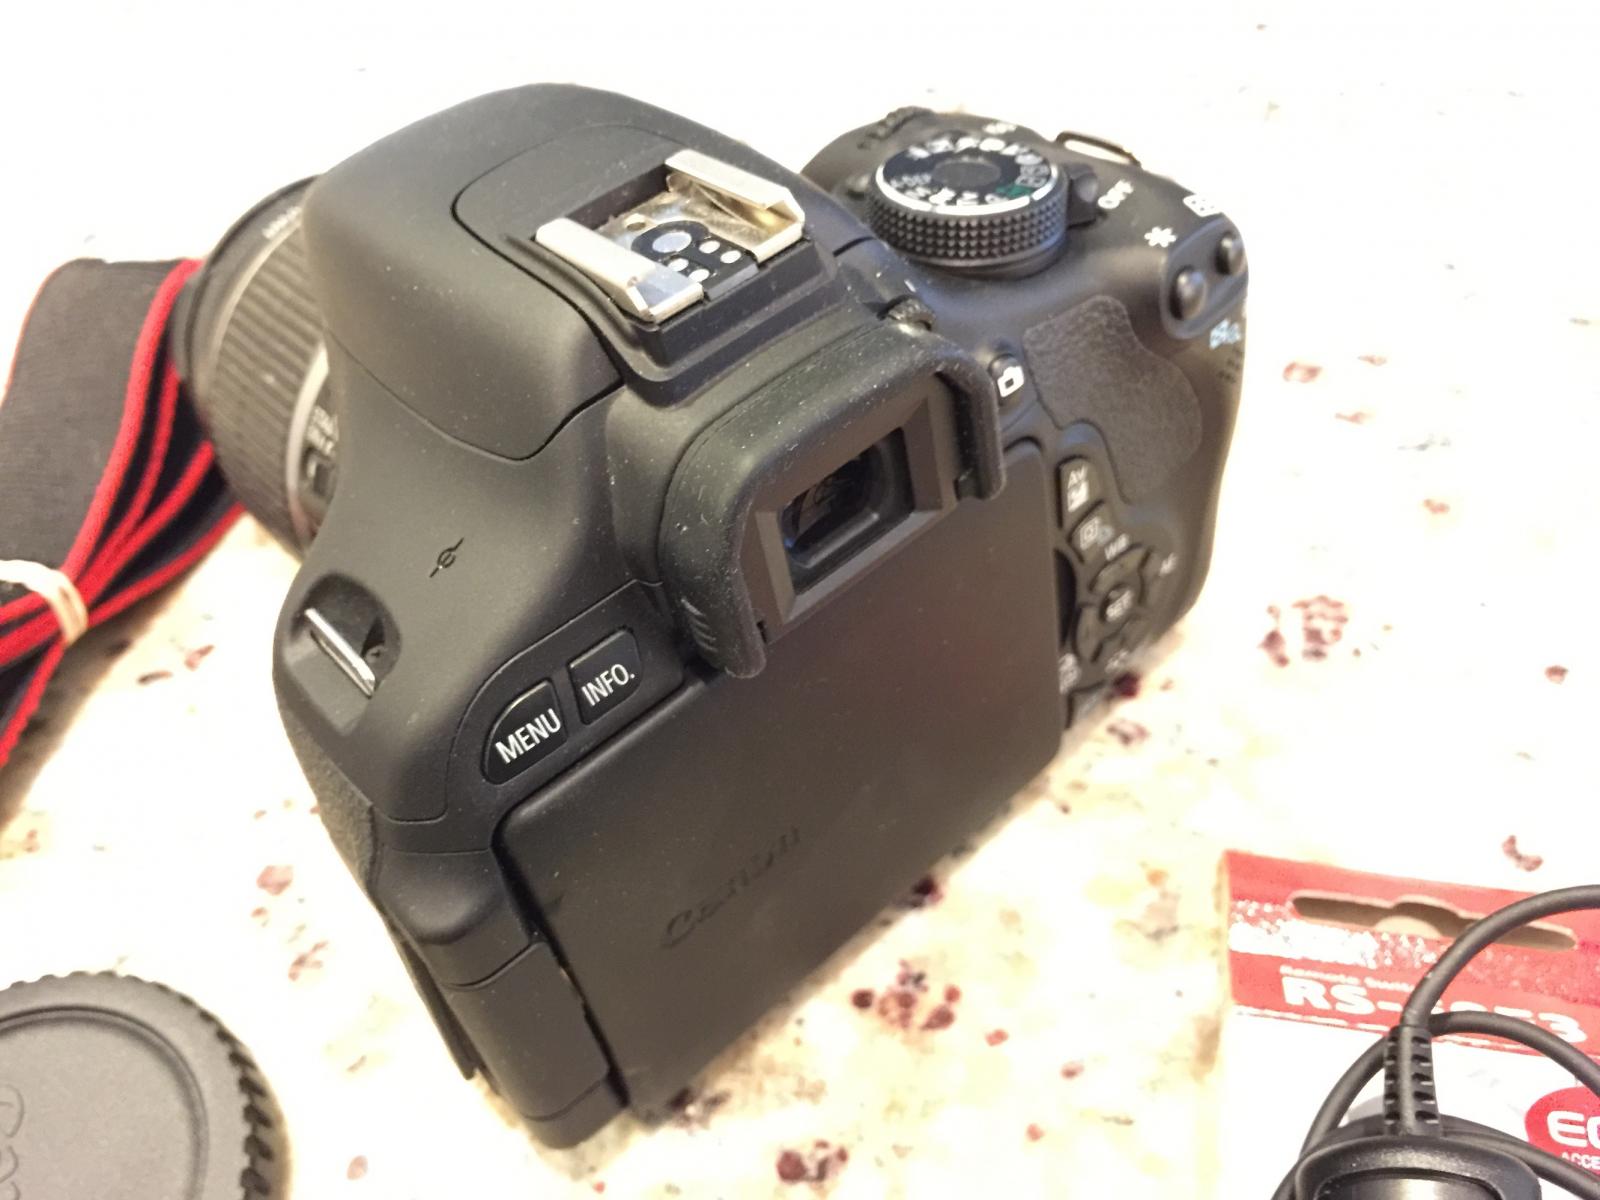 canon rebel t3i review pictures